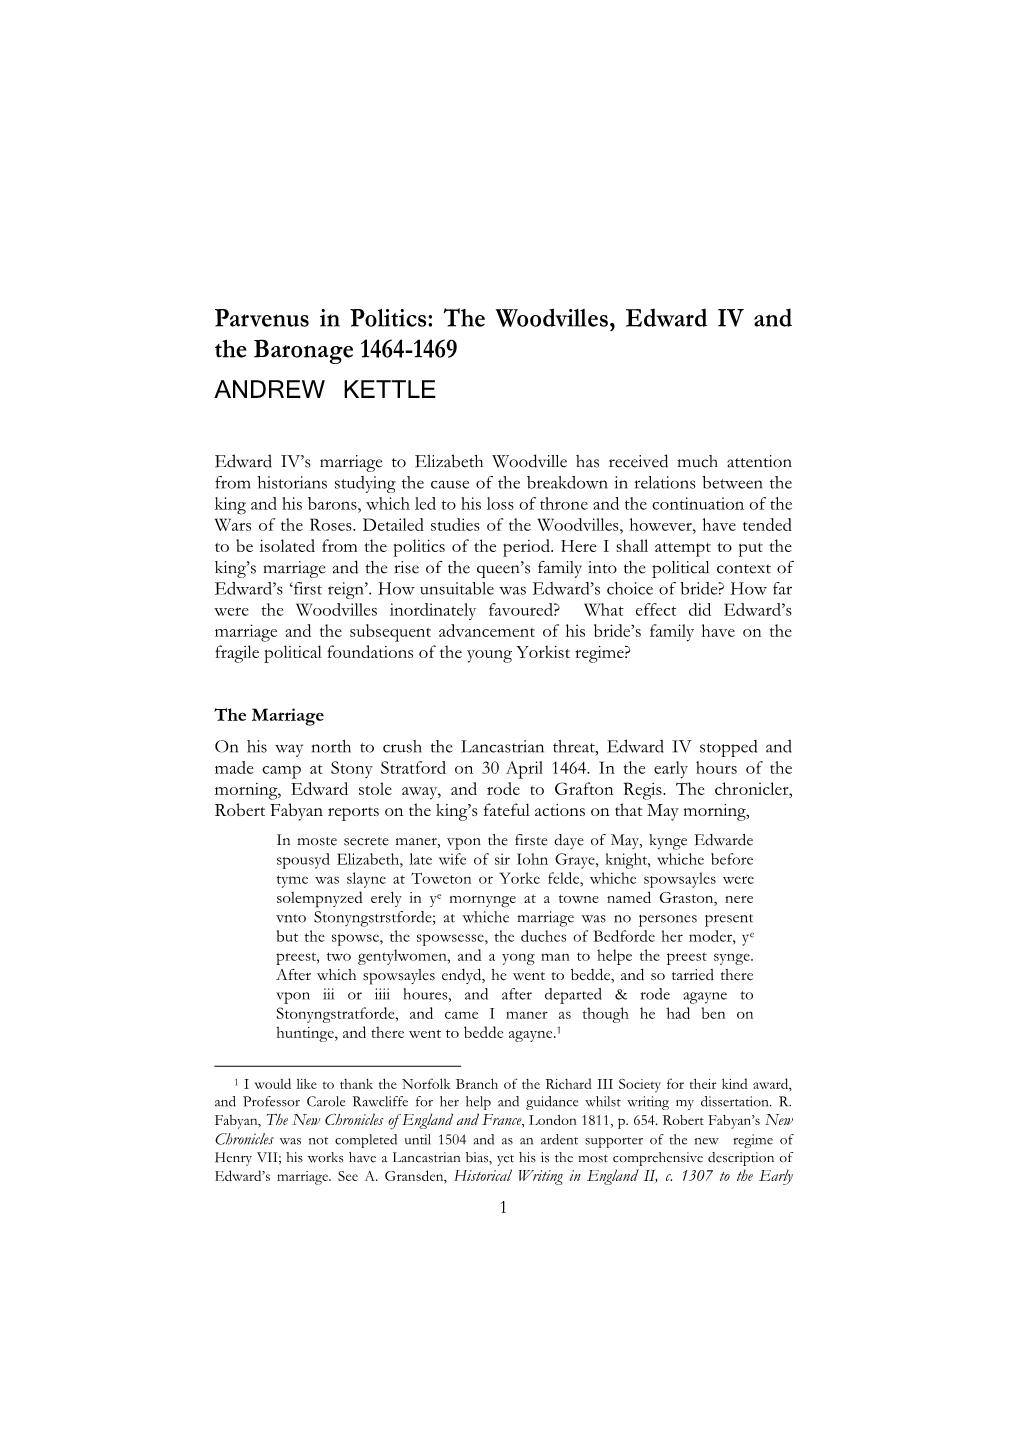 Parvenus in Politics: the Woodvilles, Edward IV and the Baronage 1464-1469 ANDREW KETTLE